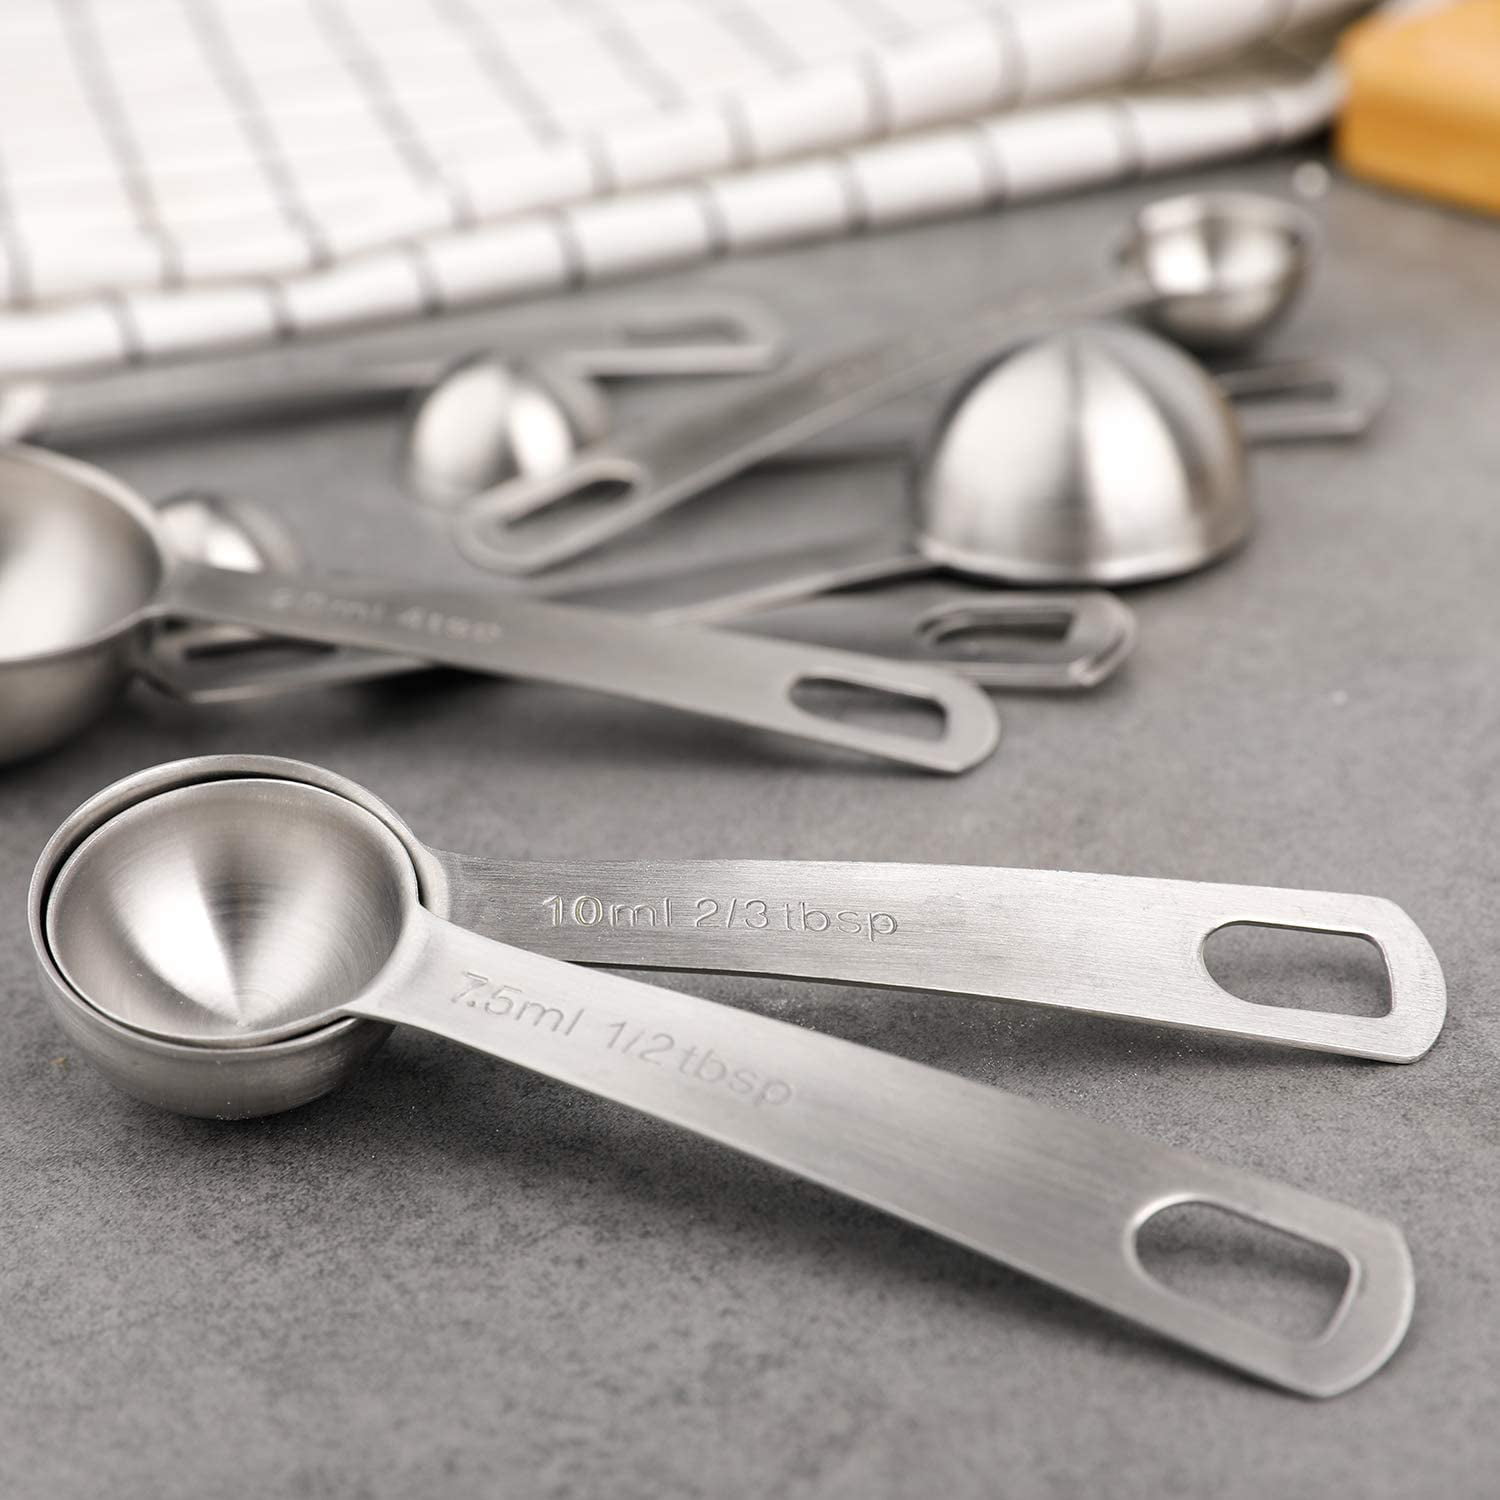 welltop 9-Piece Stainless Steel Measuring Cups and Spoons Set, Perfect —  CHIMIYA